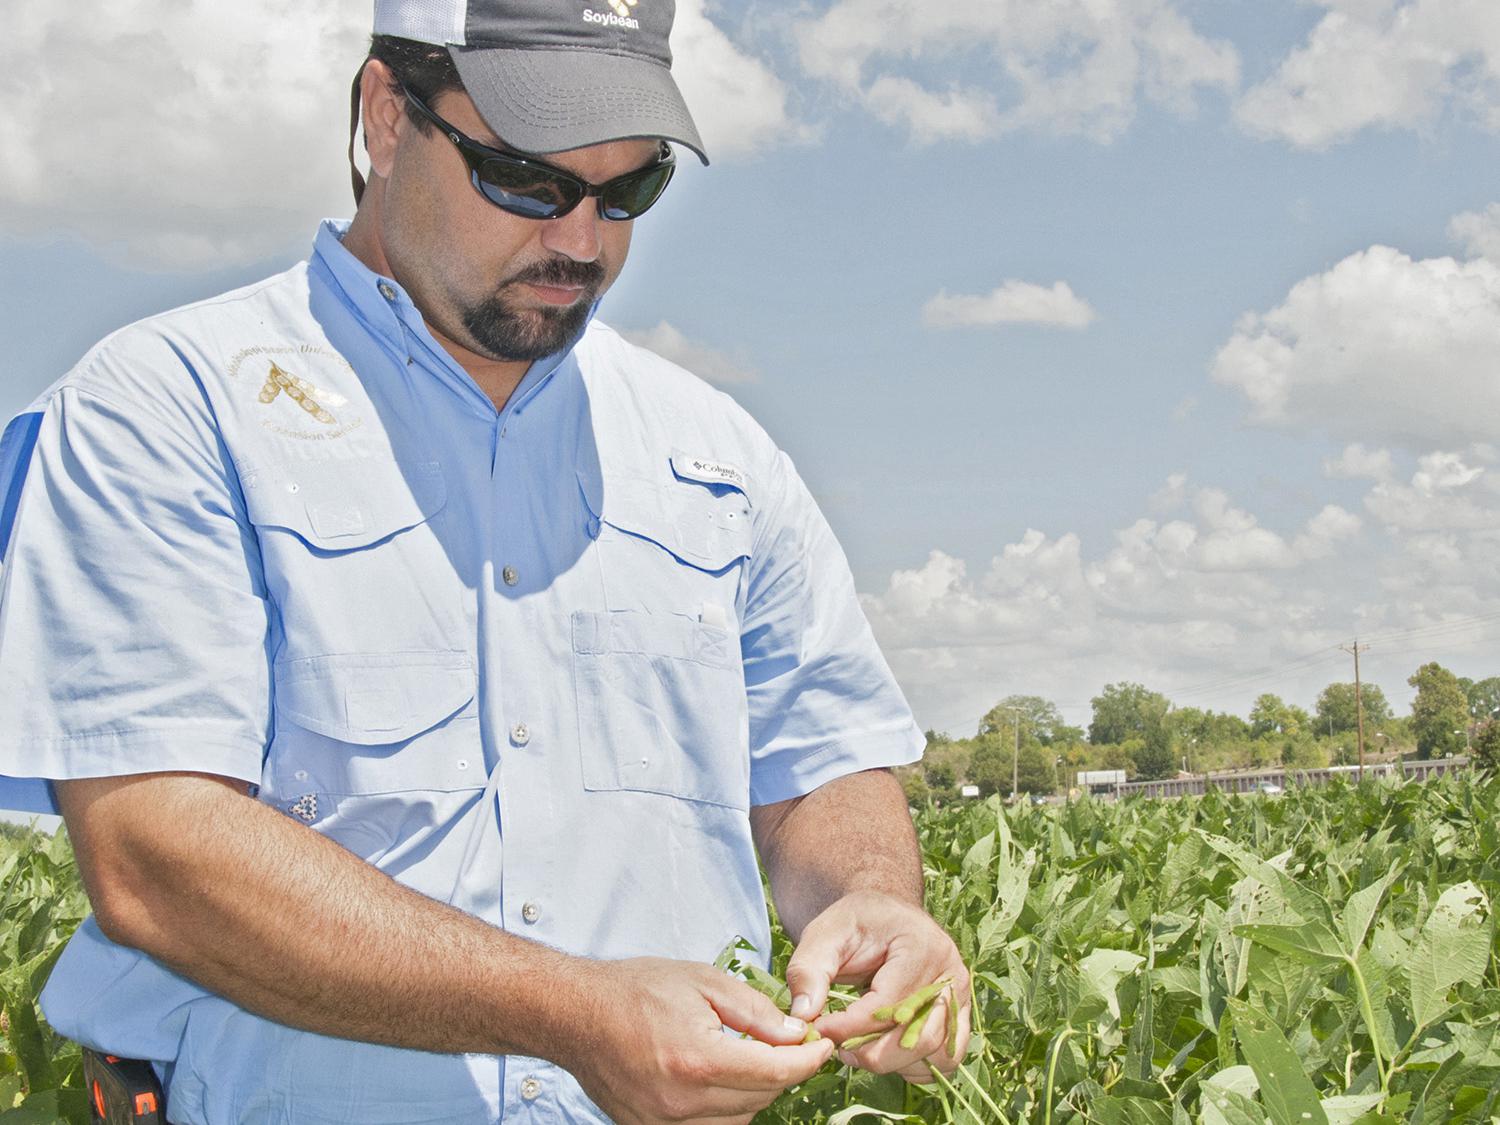 Trent Irby, Mississippi State University Extension Service soybean specialist, checks the maturity stage of soybeans planted at the R.R. Foil Research Center on the MSU campus Aug. 21, 2014. Mississippi soybean growers are expected to harvest a record yield this year. (Photo by MSU Ag Communications/Kat Lawrence)